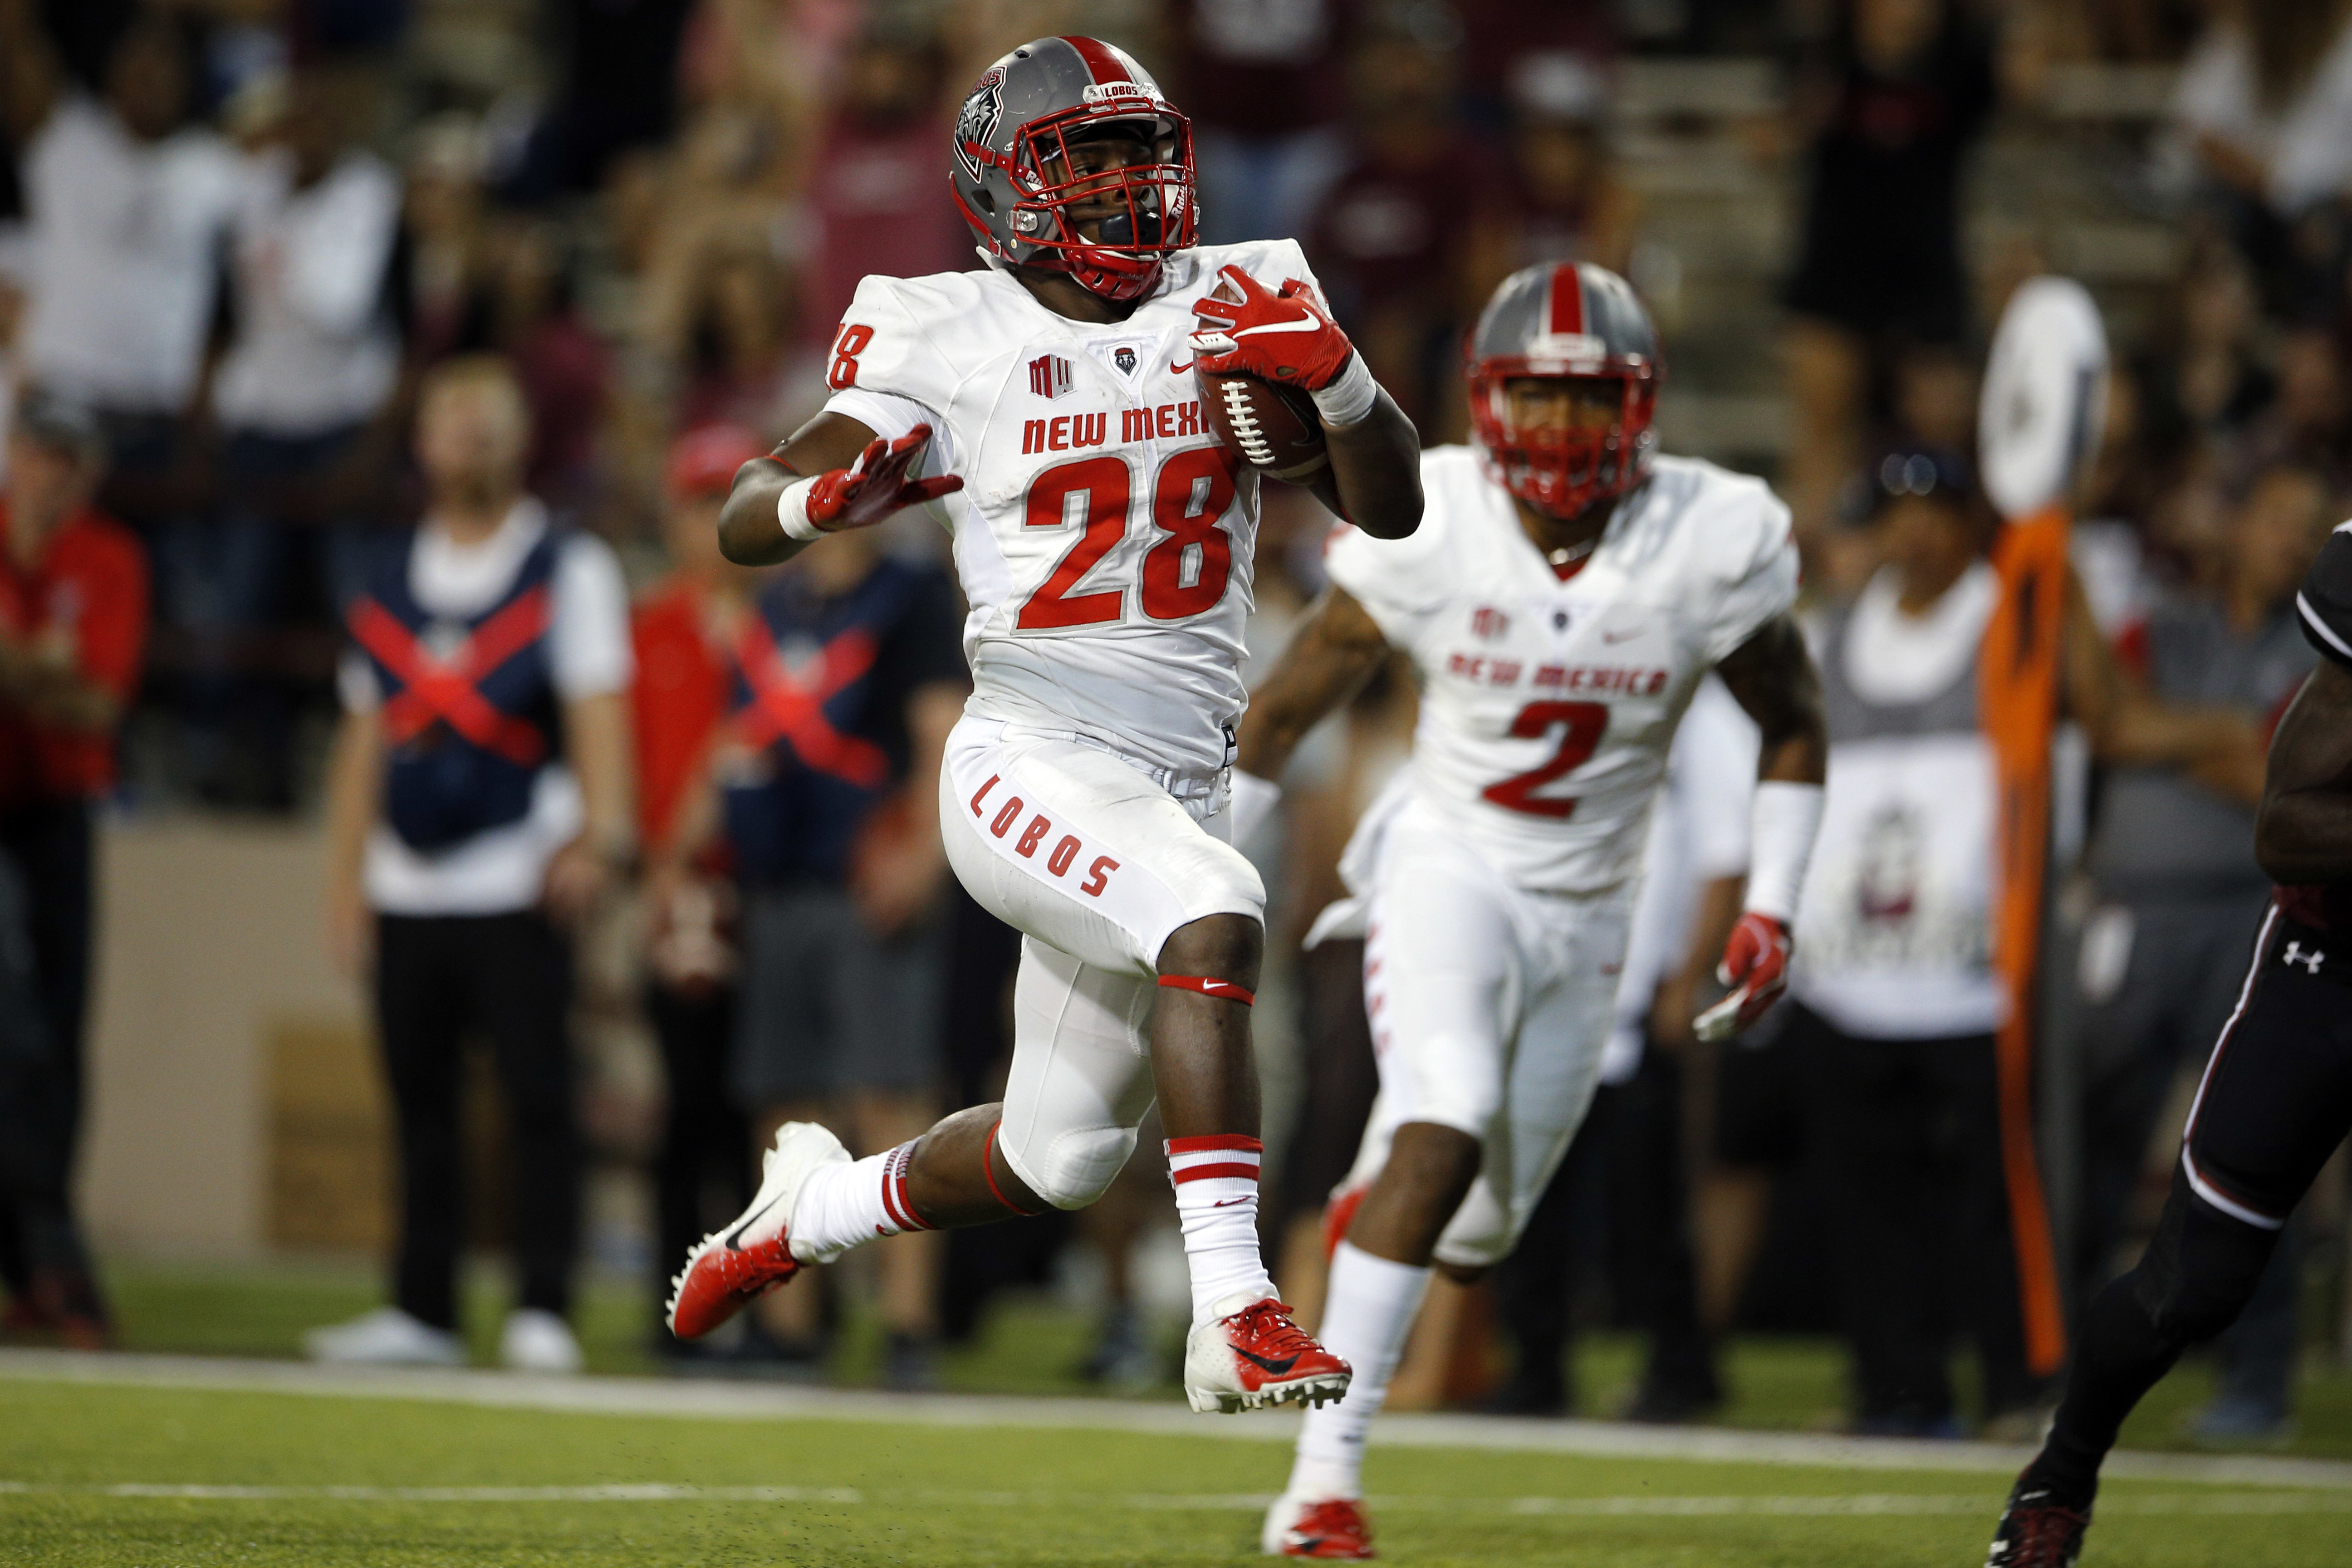 Davis' 4 rushing TDs help New Mexico beat New Mexico State